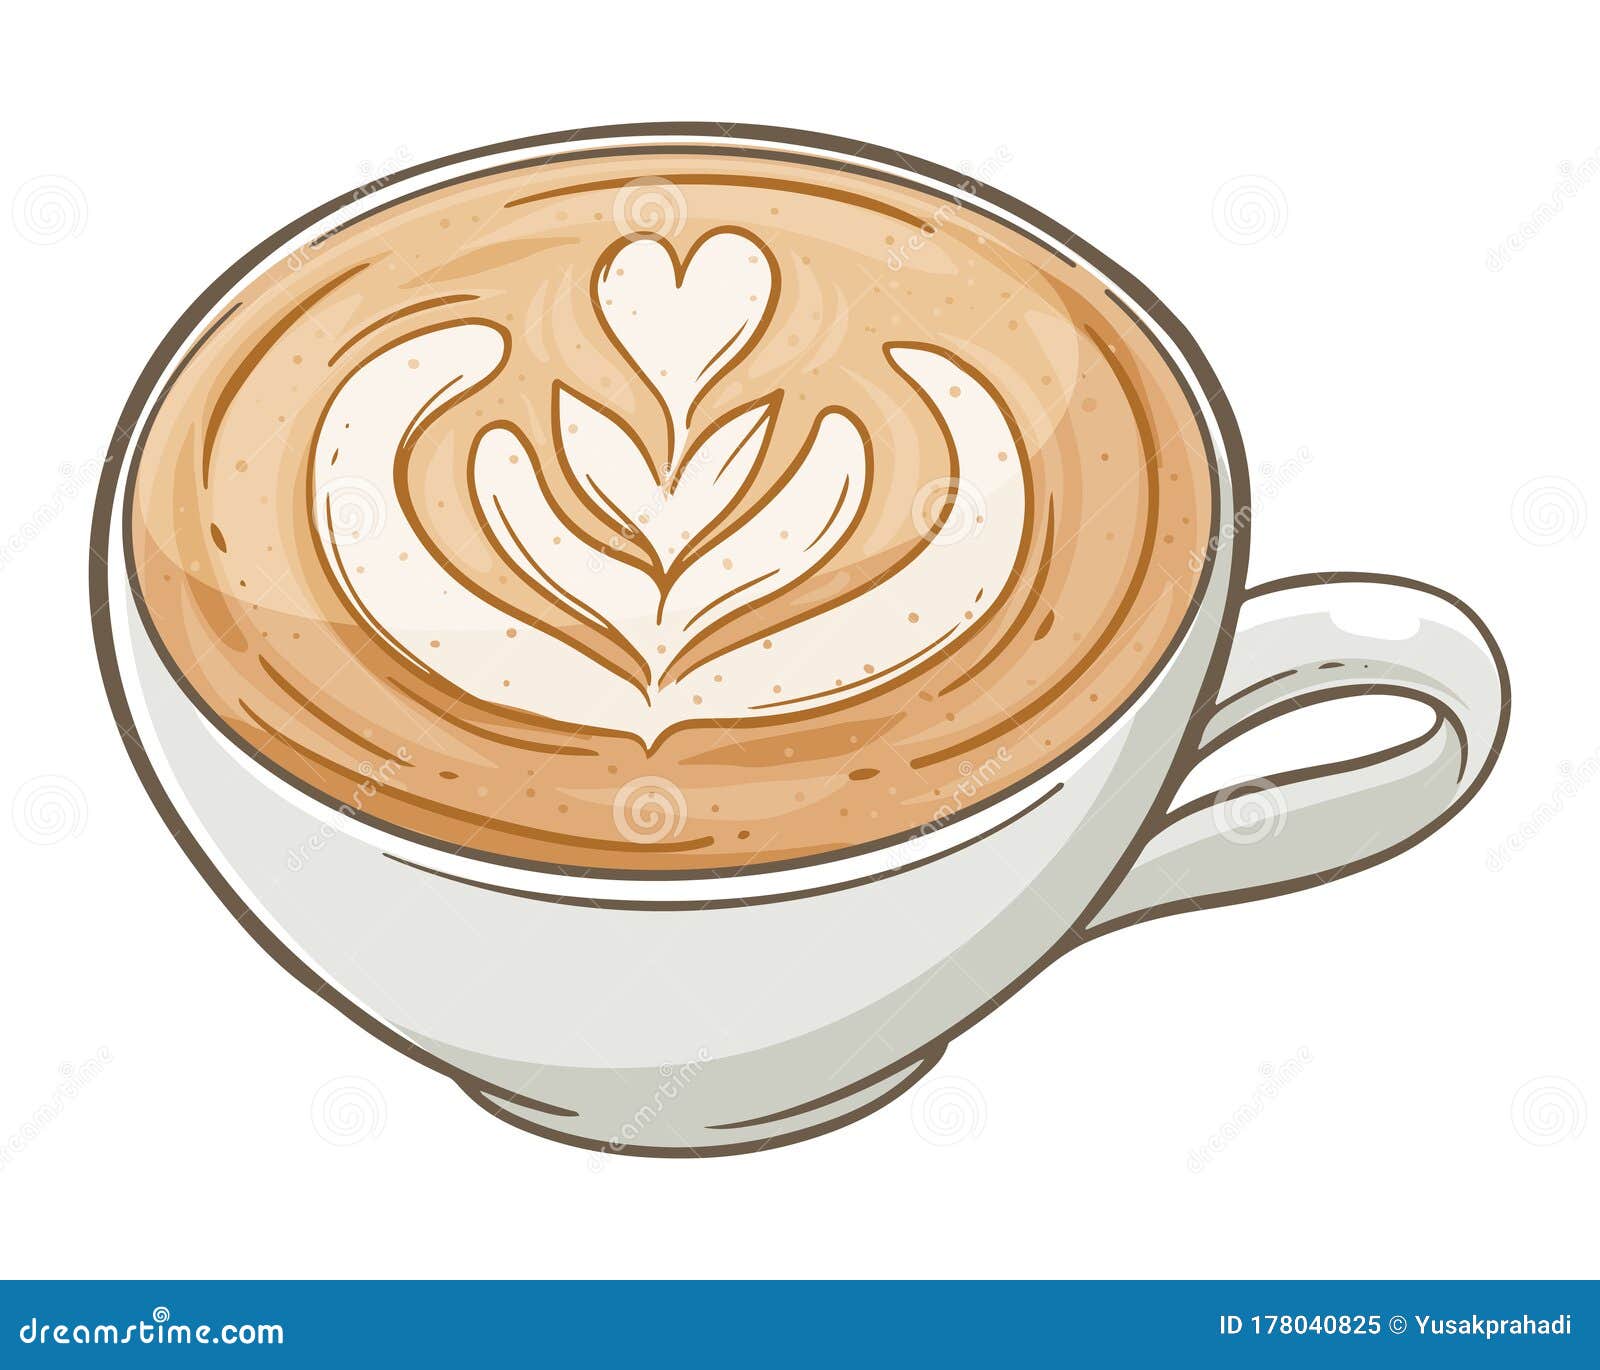 https://thumbs.dreamstime.com/z/coffee-latte-art-cup-hand-drawn-vector-illustration-isolated-white-background-178040825.jpg